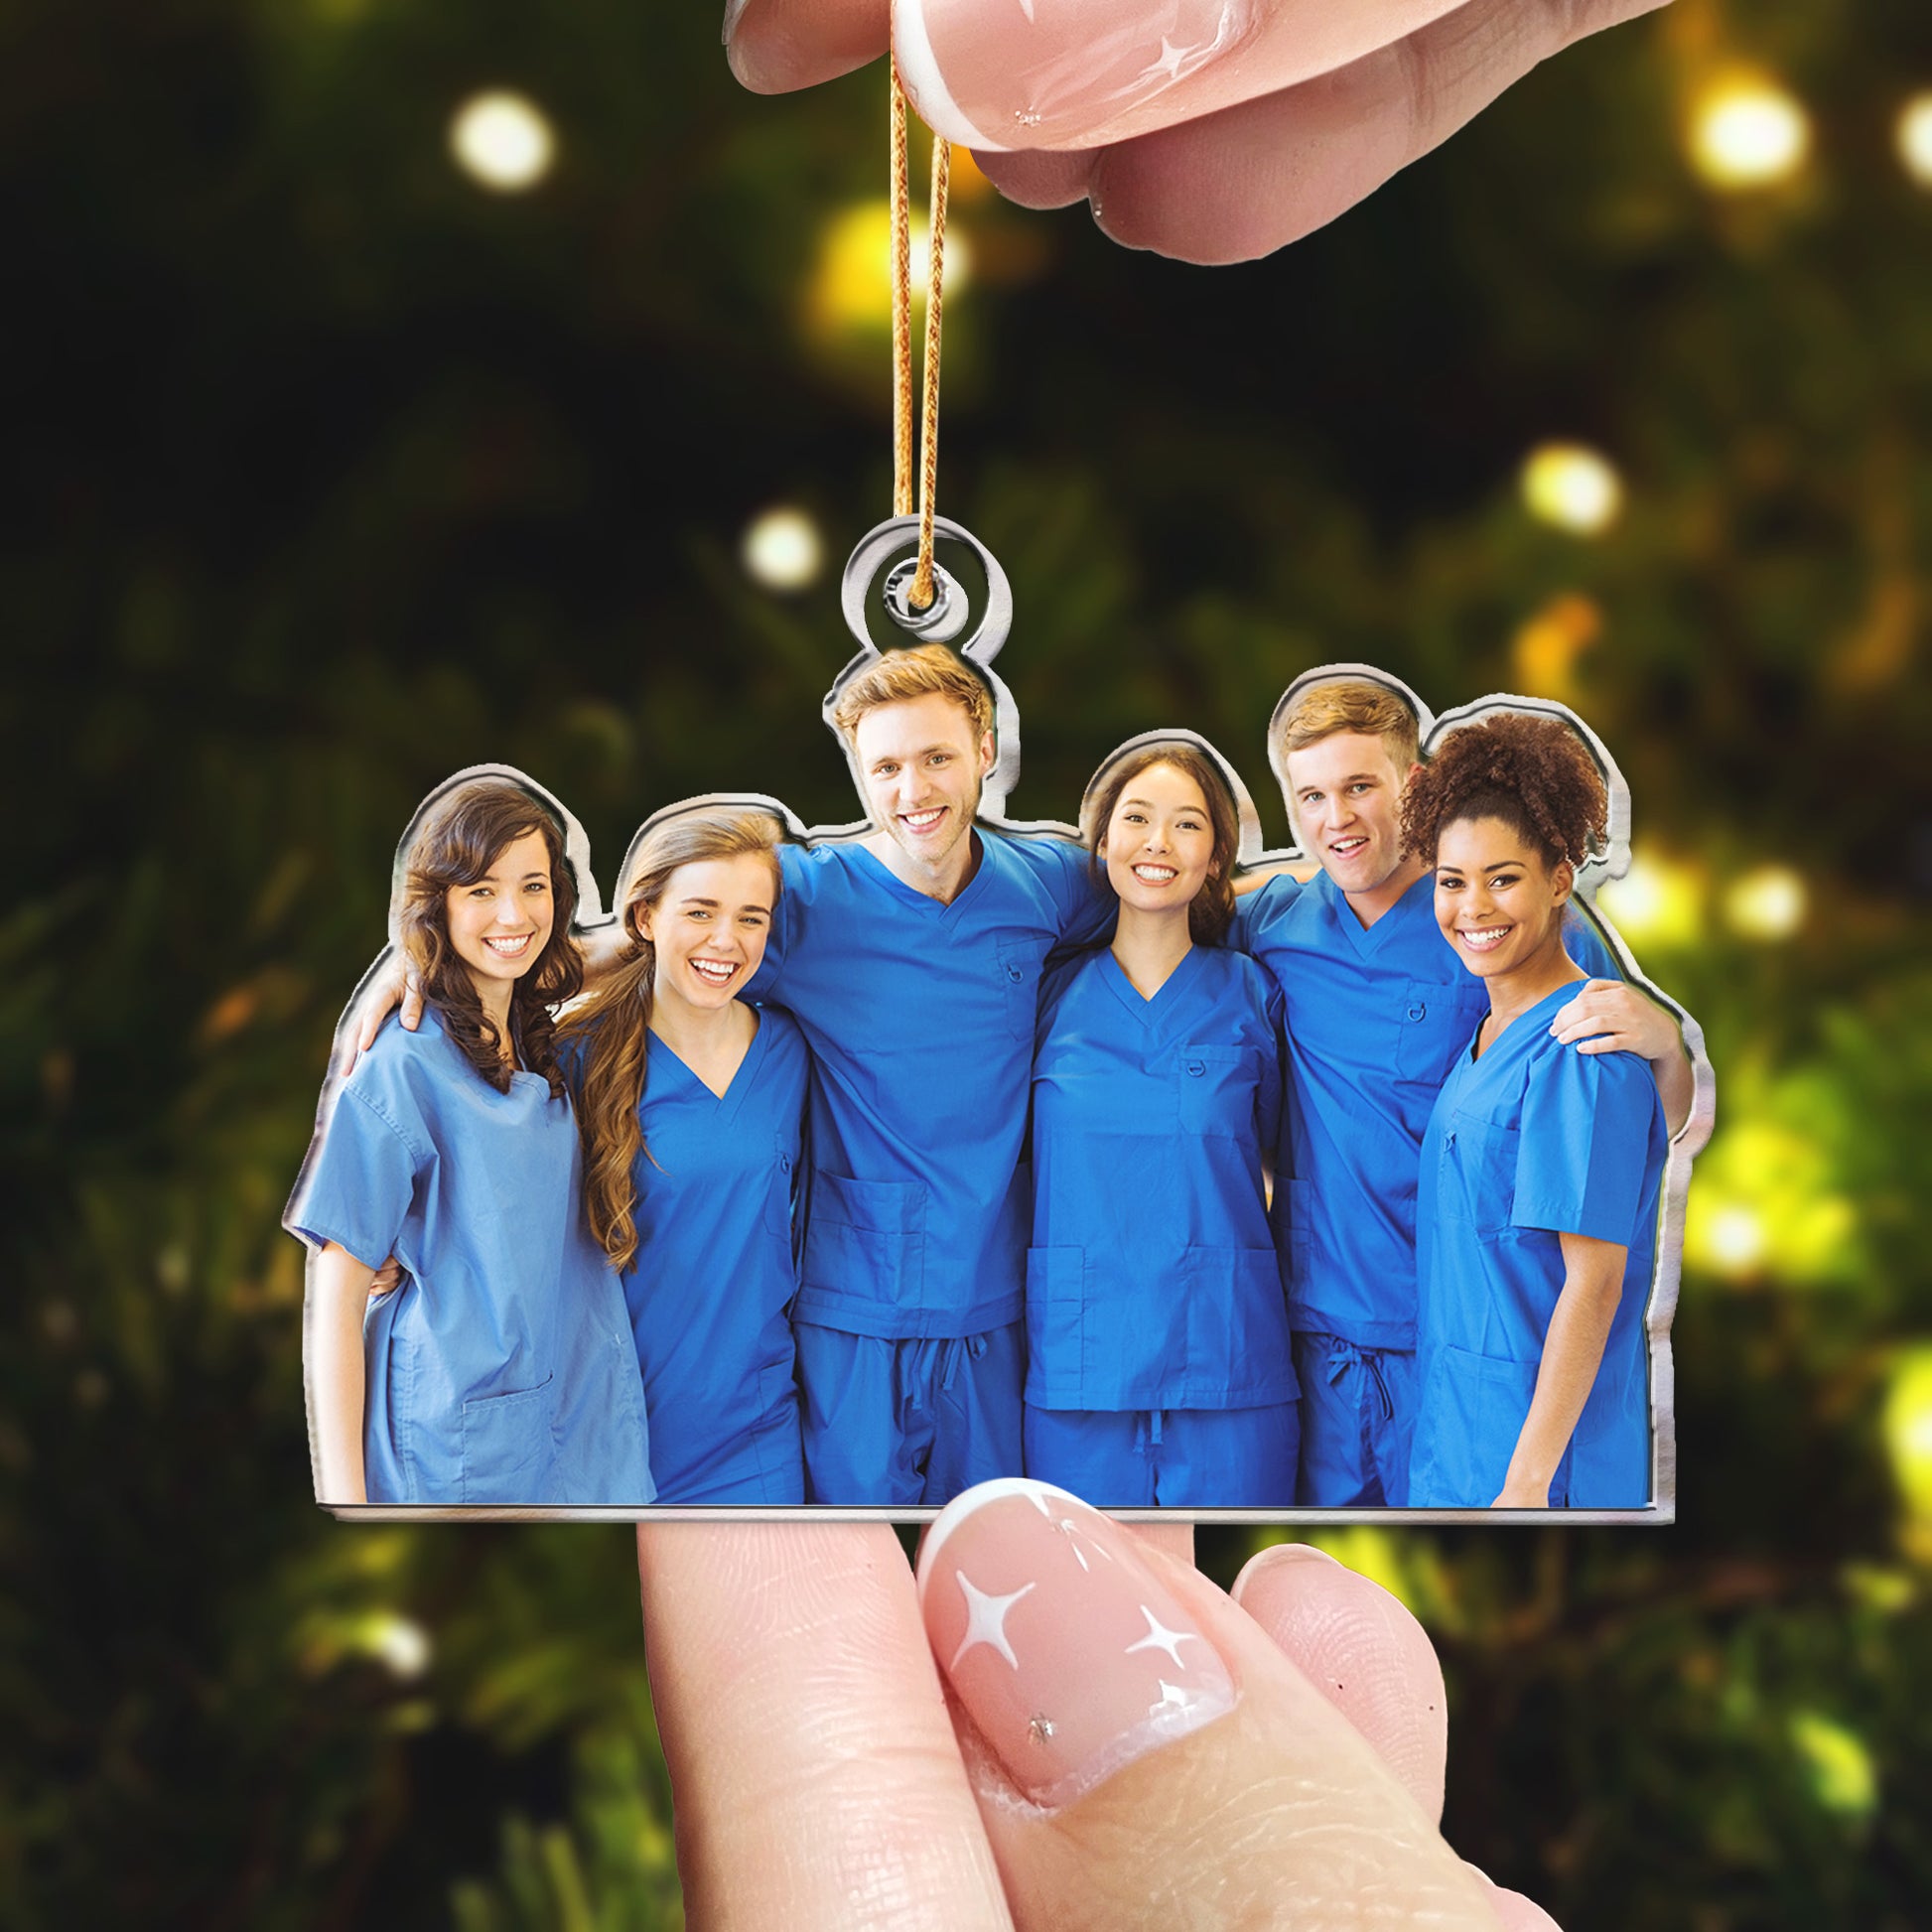 Christmas Gift For Nurse Besties - Personalized Acrylic Photo Ornament